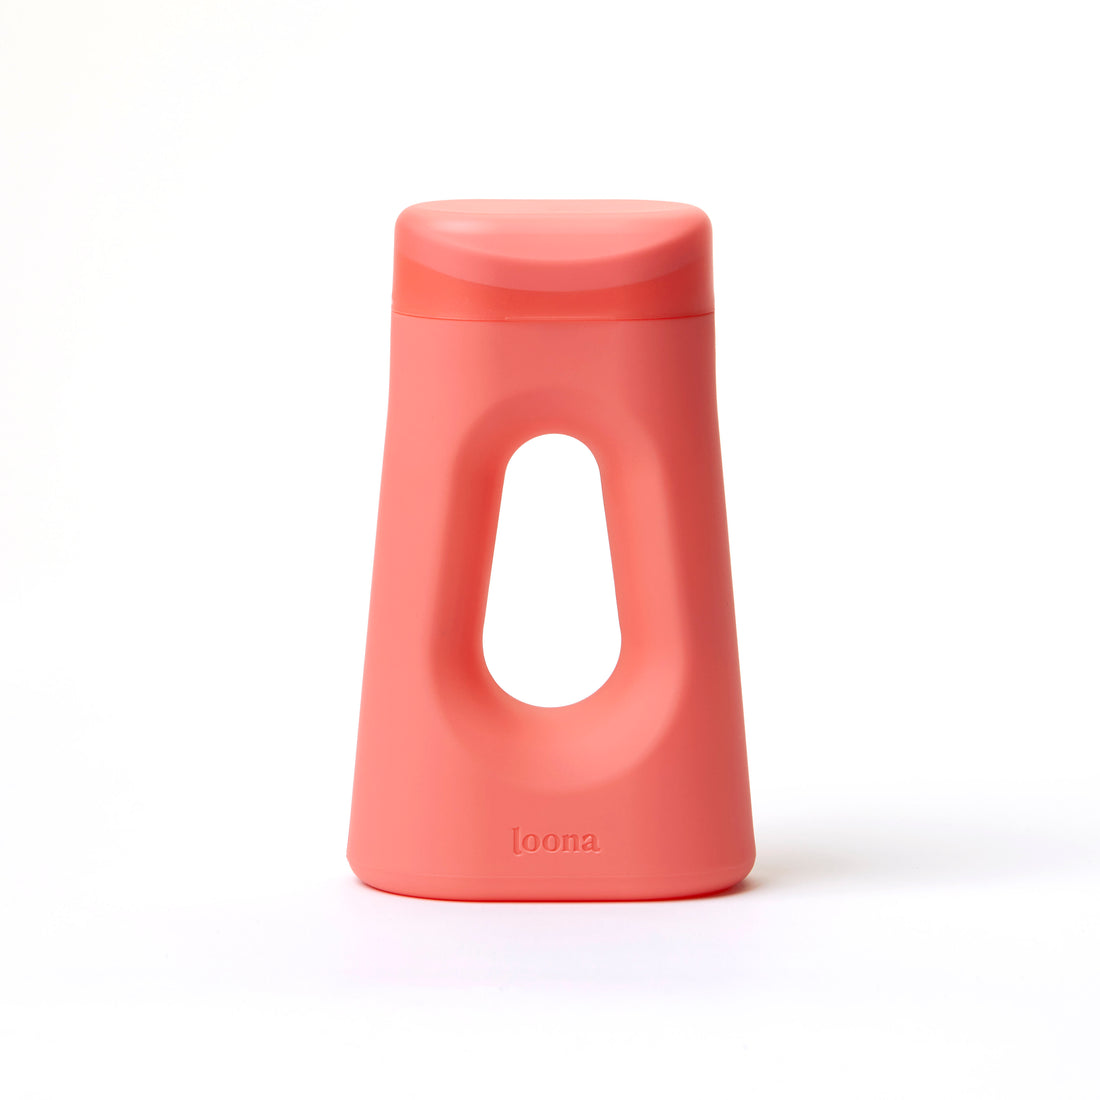 The Loona Female Urinal shown in coral dream color